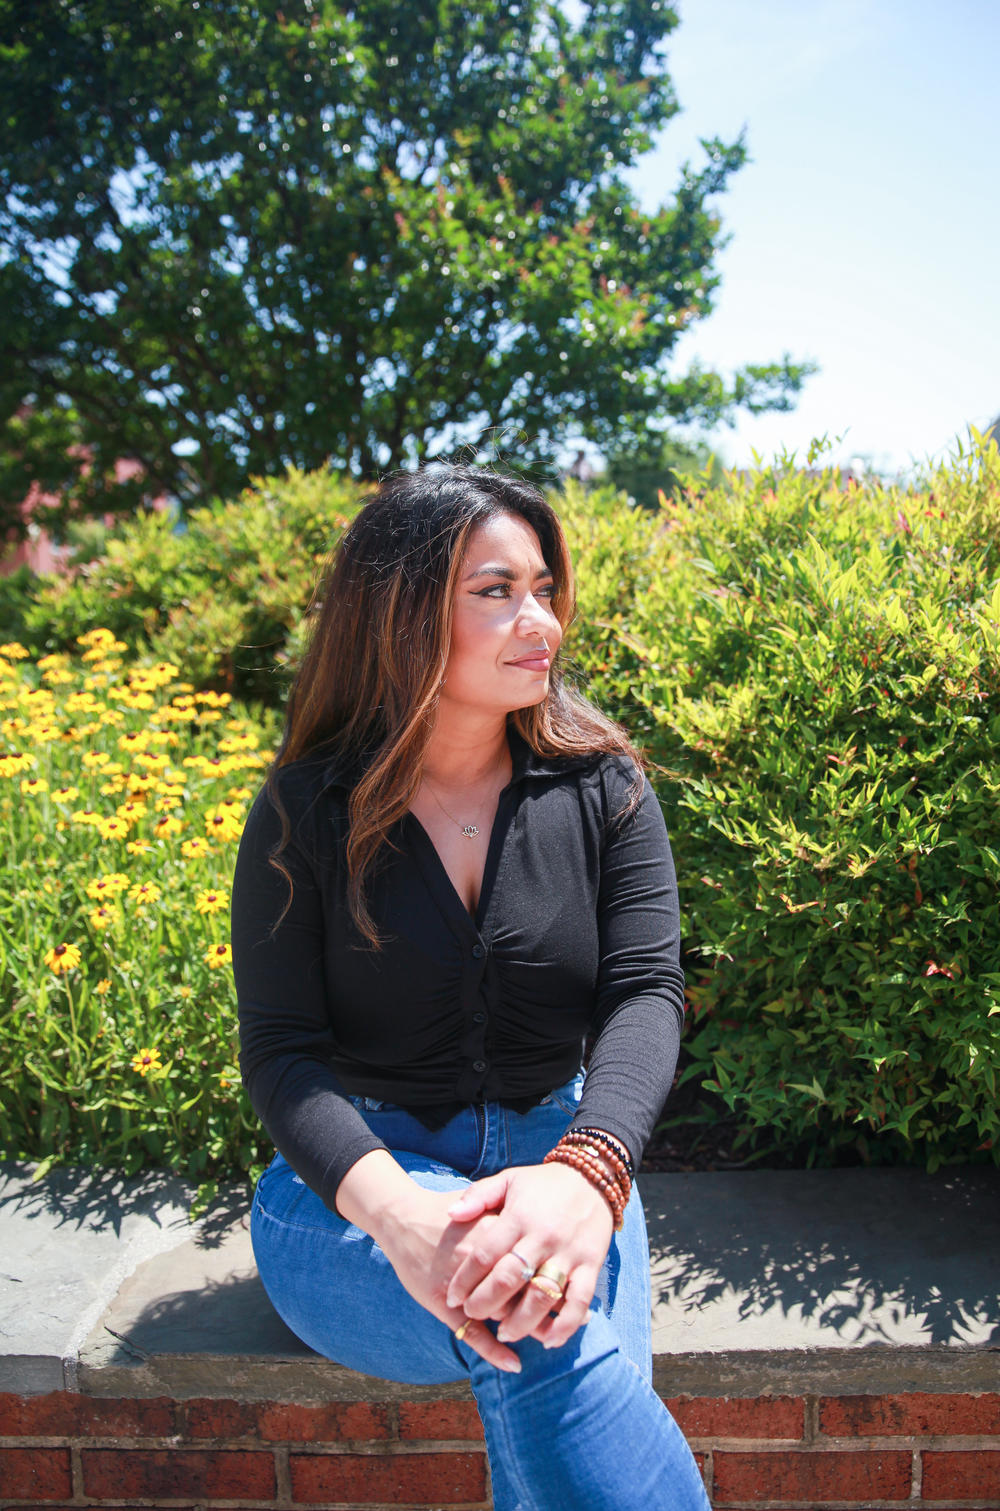 Before serving about five years at a women's prison in Texas, Rabia Qutab had finished a pre-med degree and was getting ready to apply to medical school. She says transitioning back to life on the outside wasn't easy.